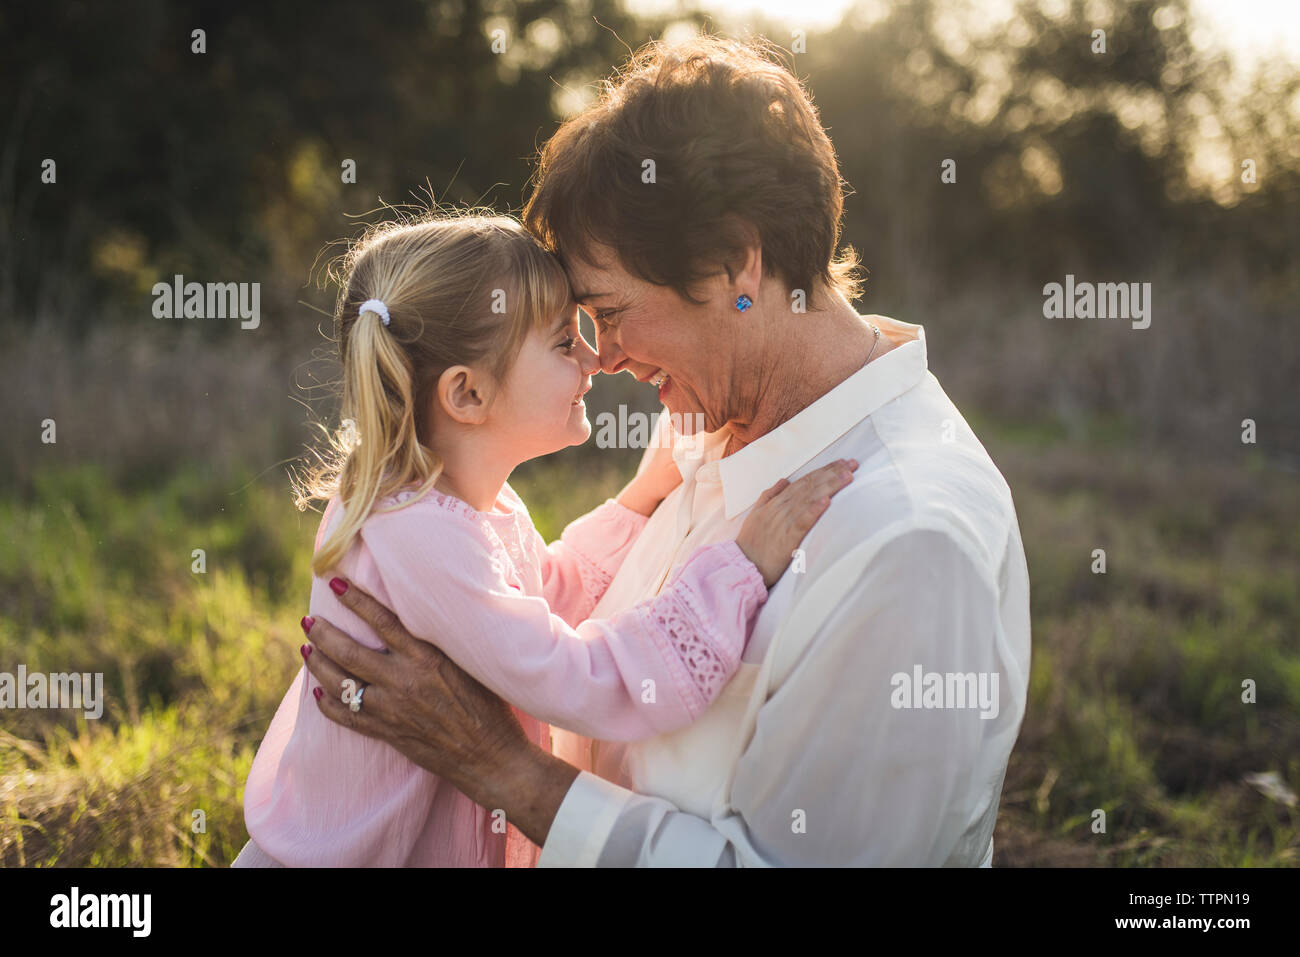 Portrait of grandmother and granddaughter embracing and smiling Stock Photo